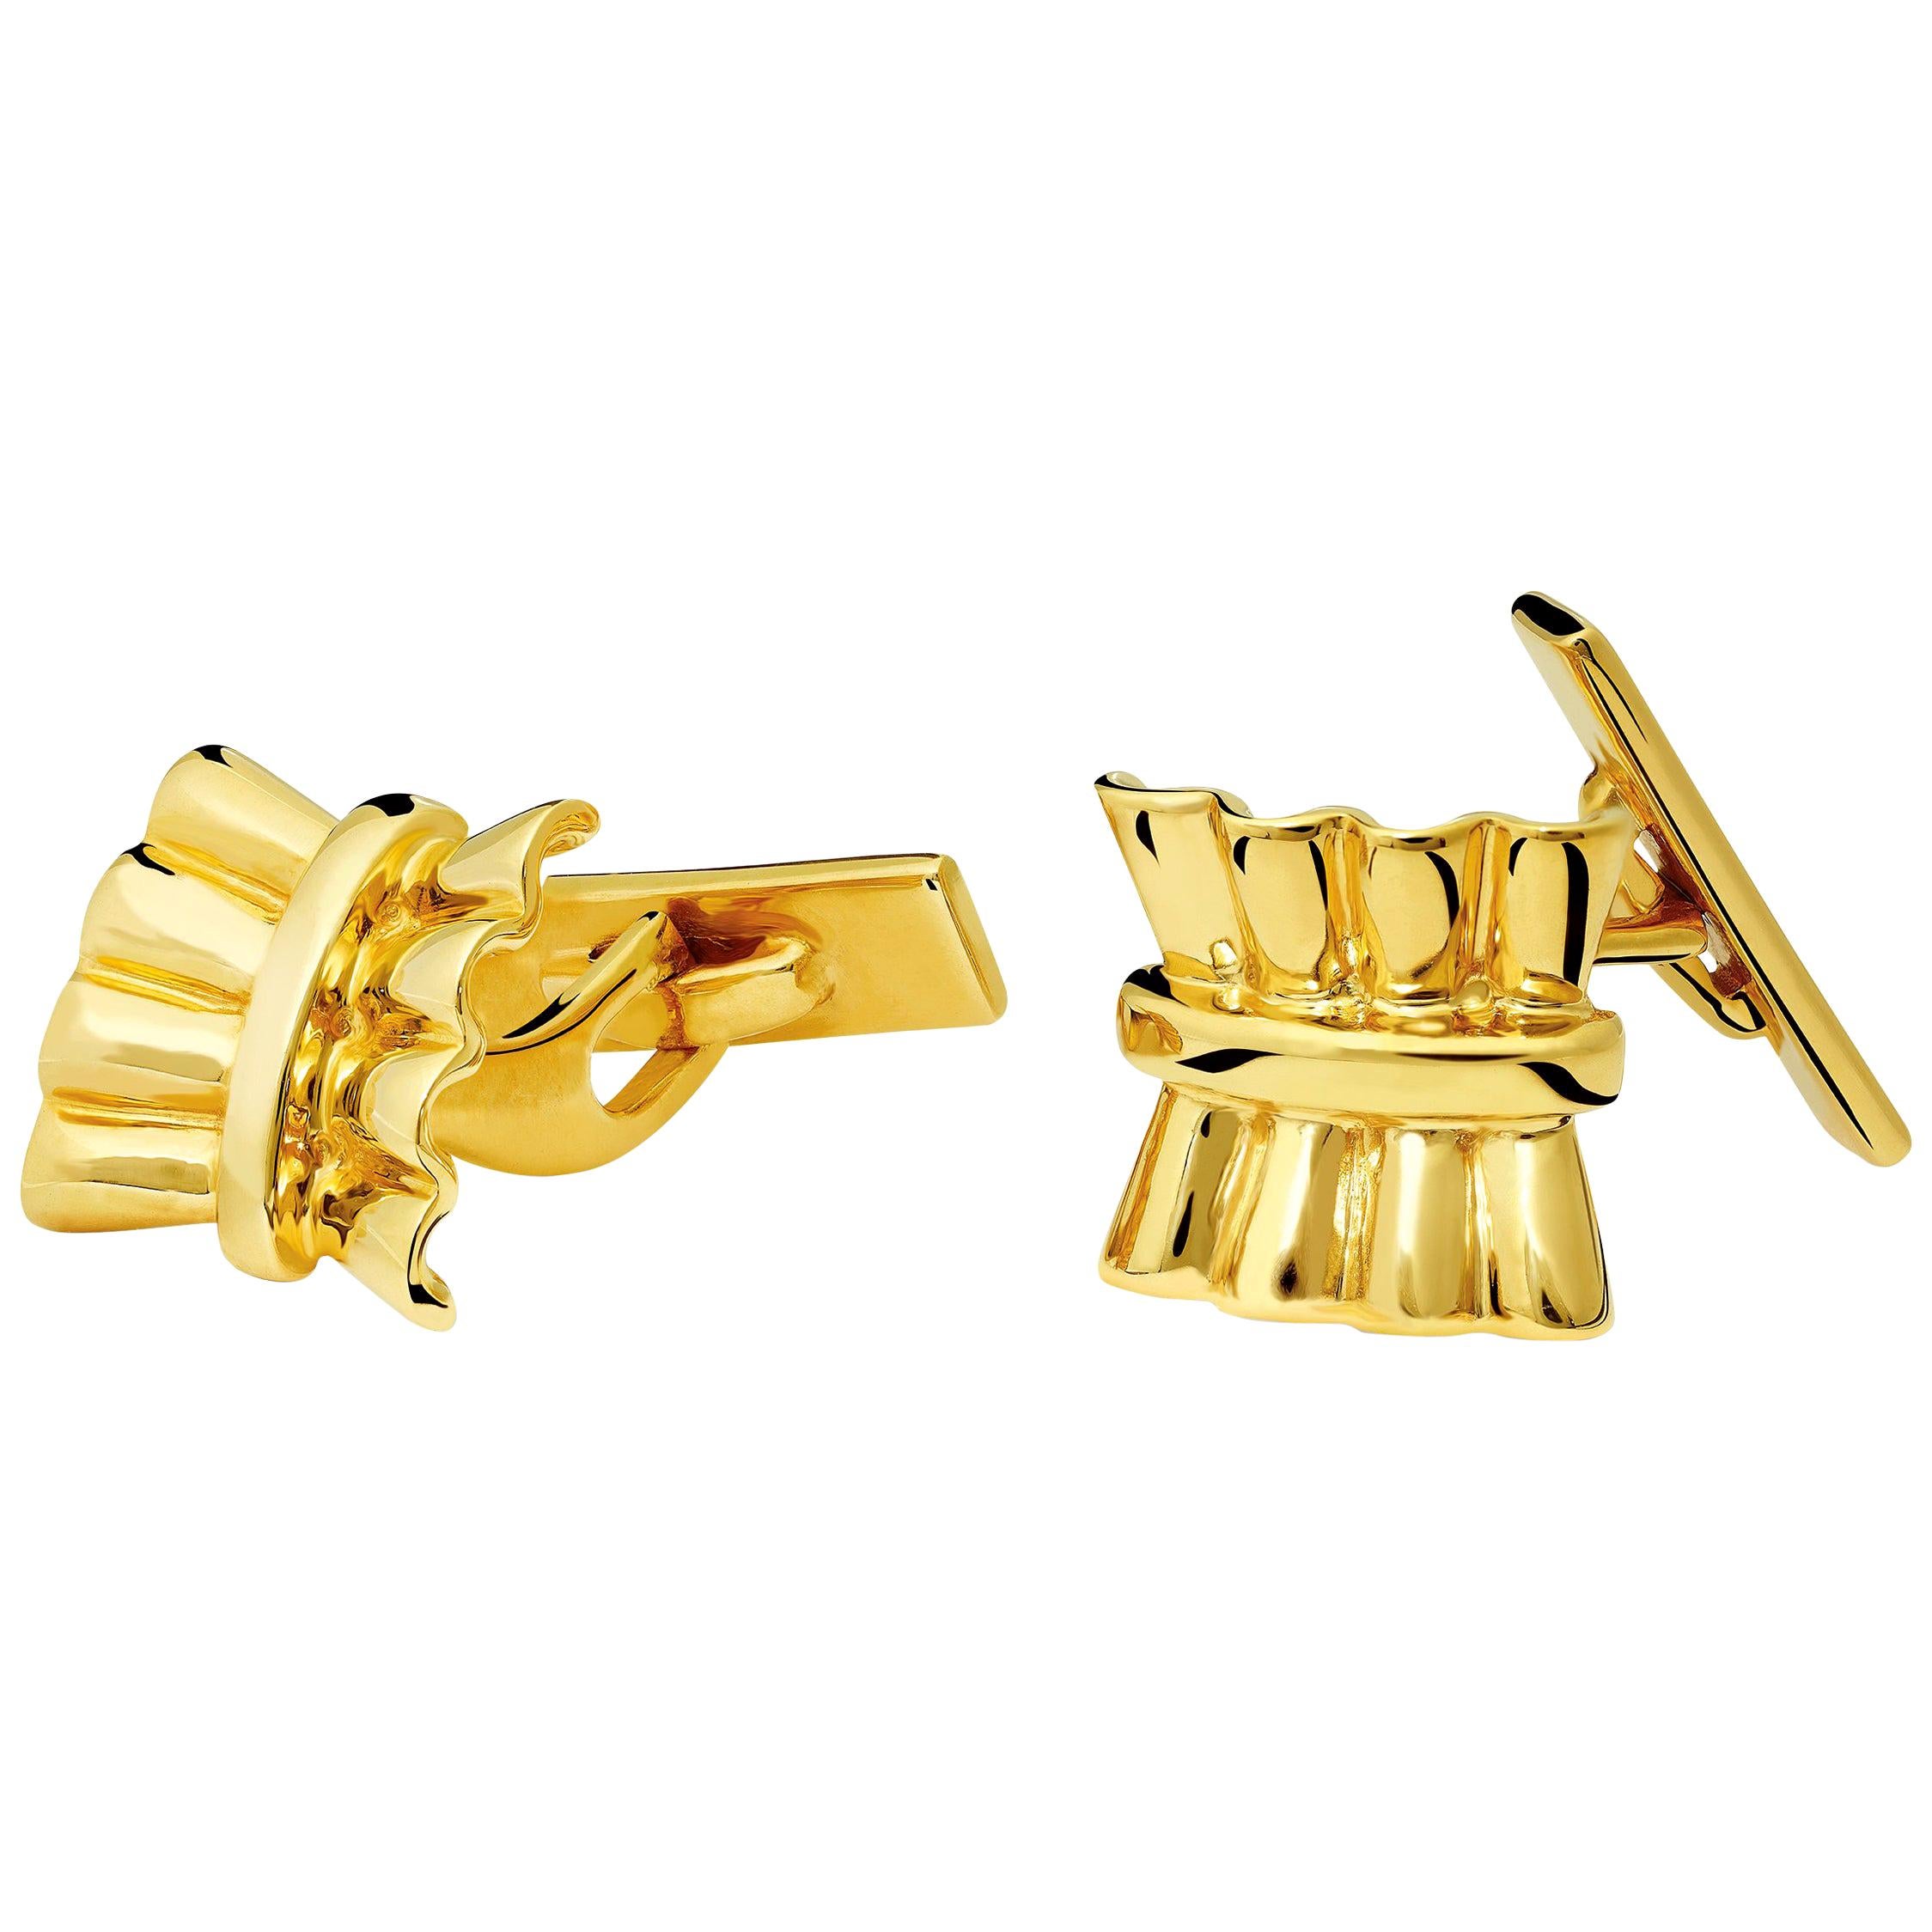 Uxmal Single Ended 9 Karat Yellow Gold Cufflinks For Sale